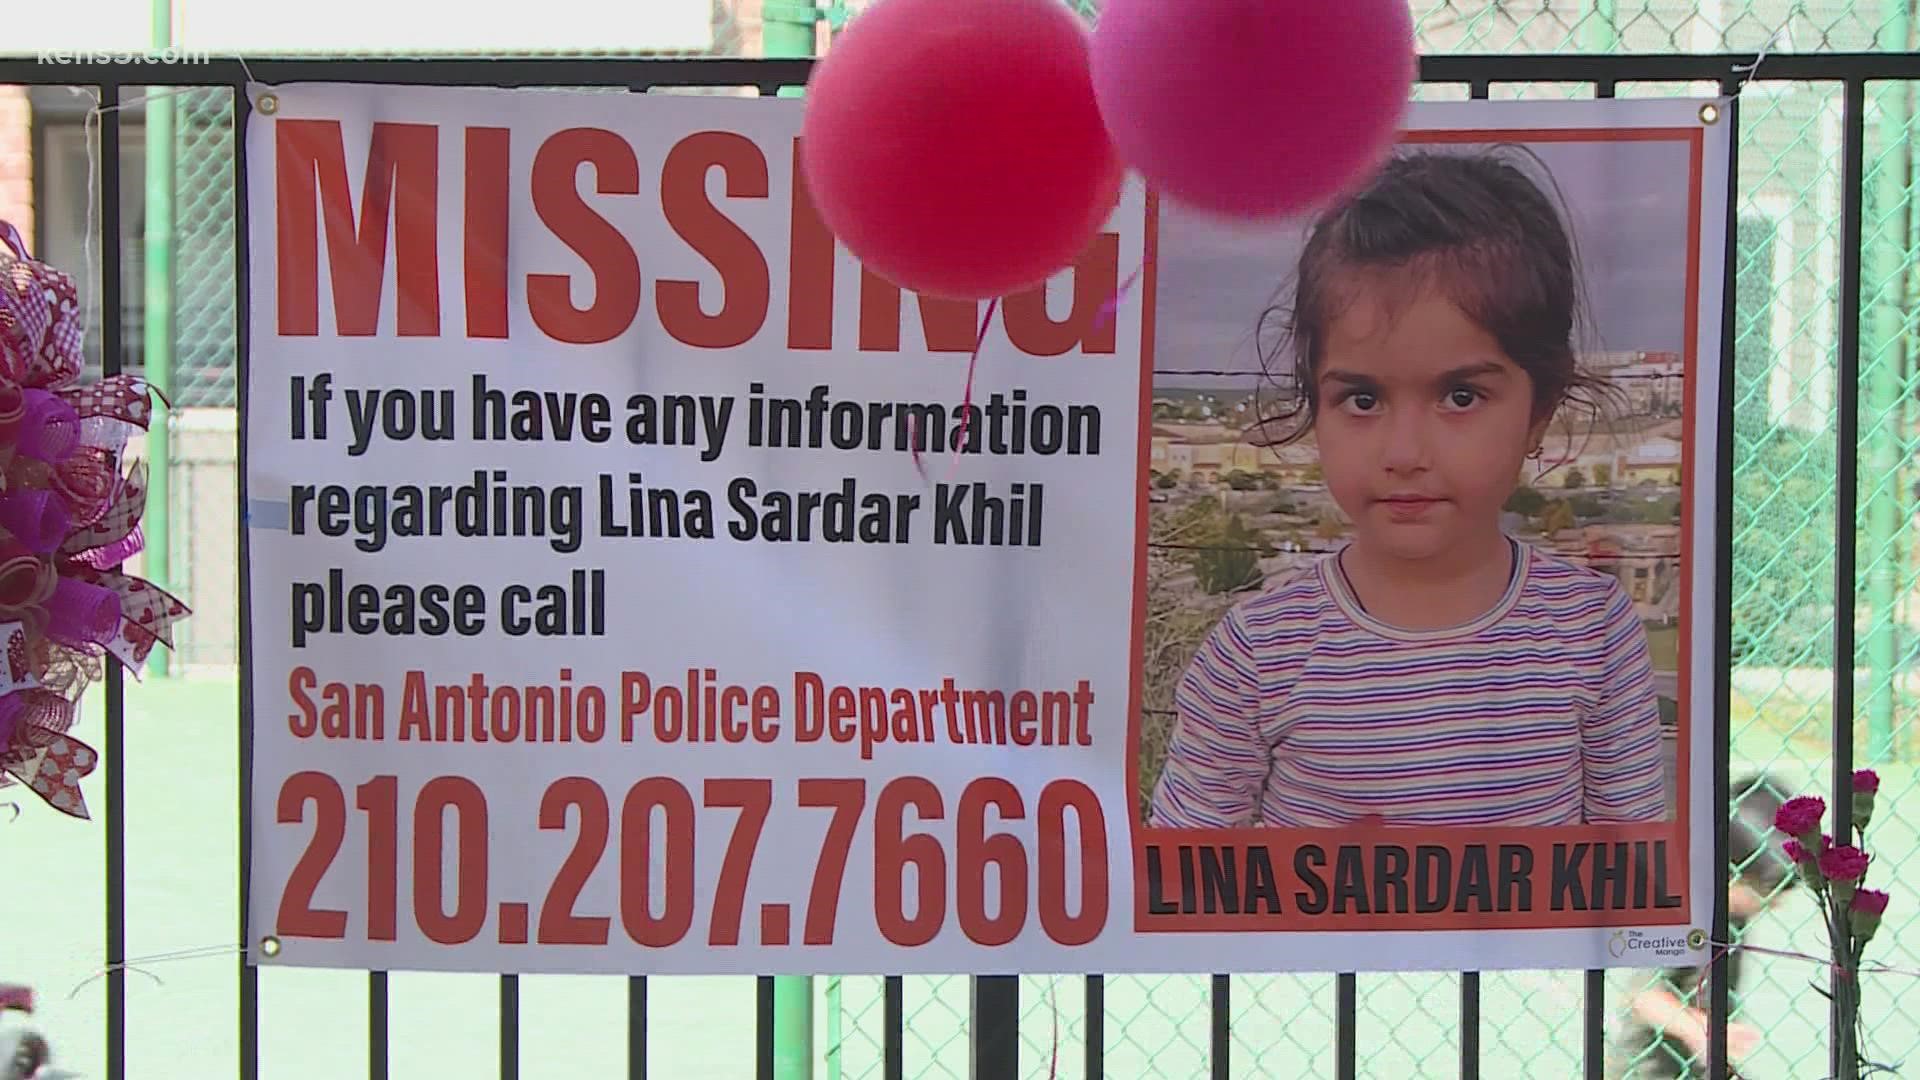 The toddler has now been missing for two months. Her family spoke at an event on Sunday, feeling support from the community as answers remain elusive.